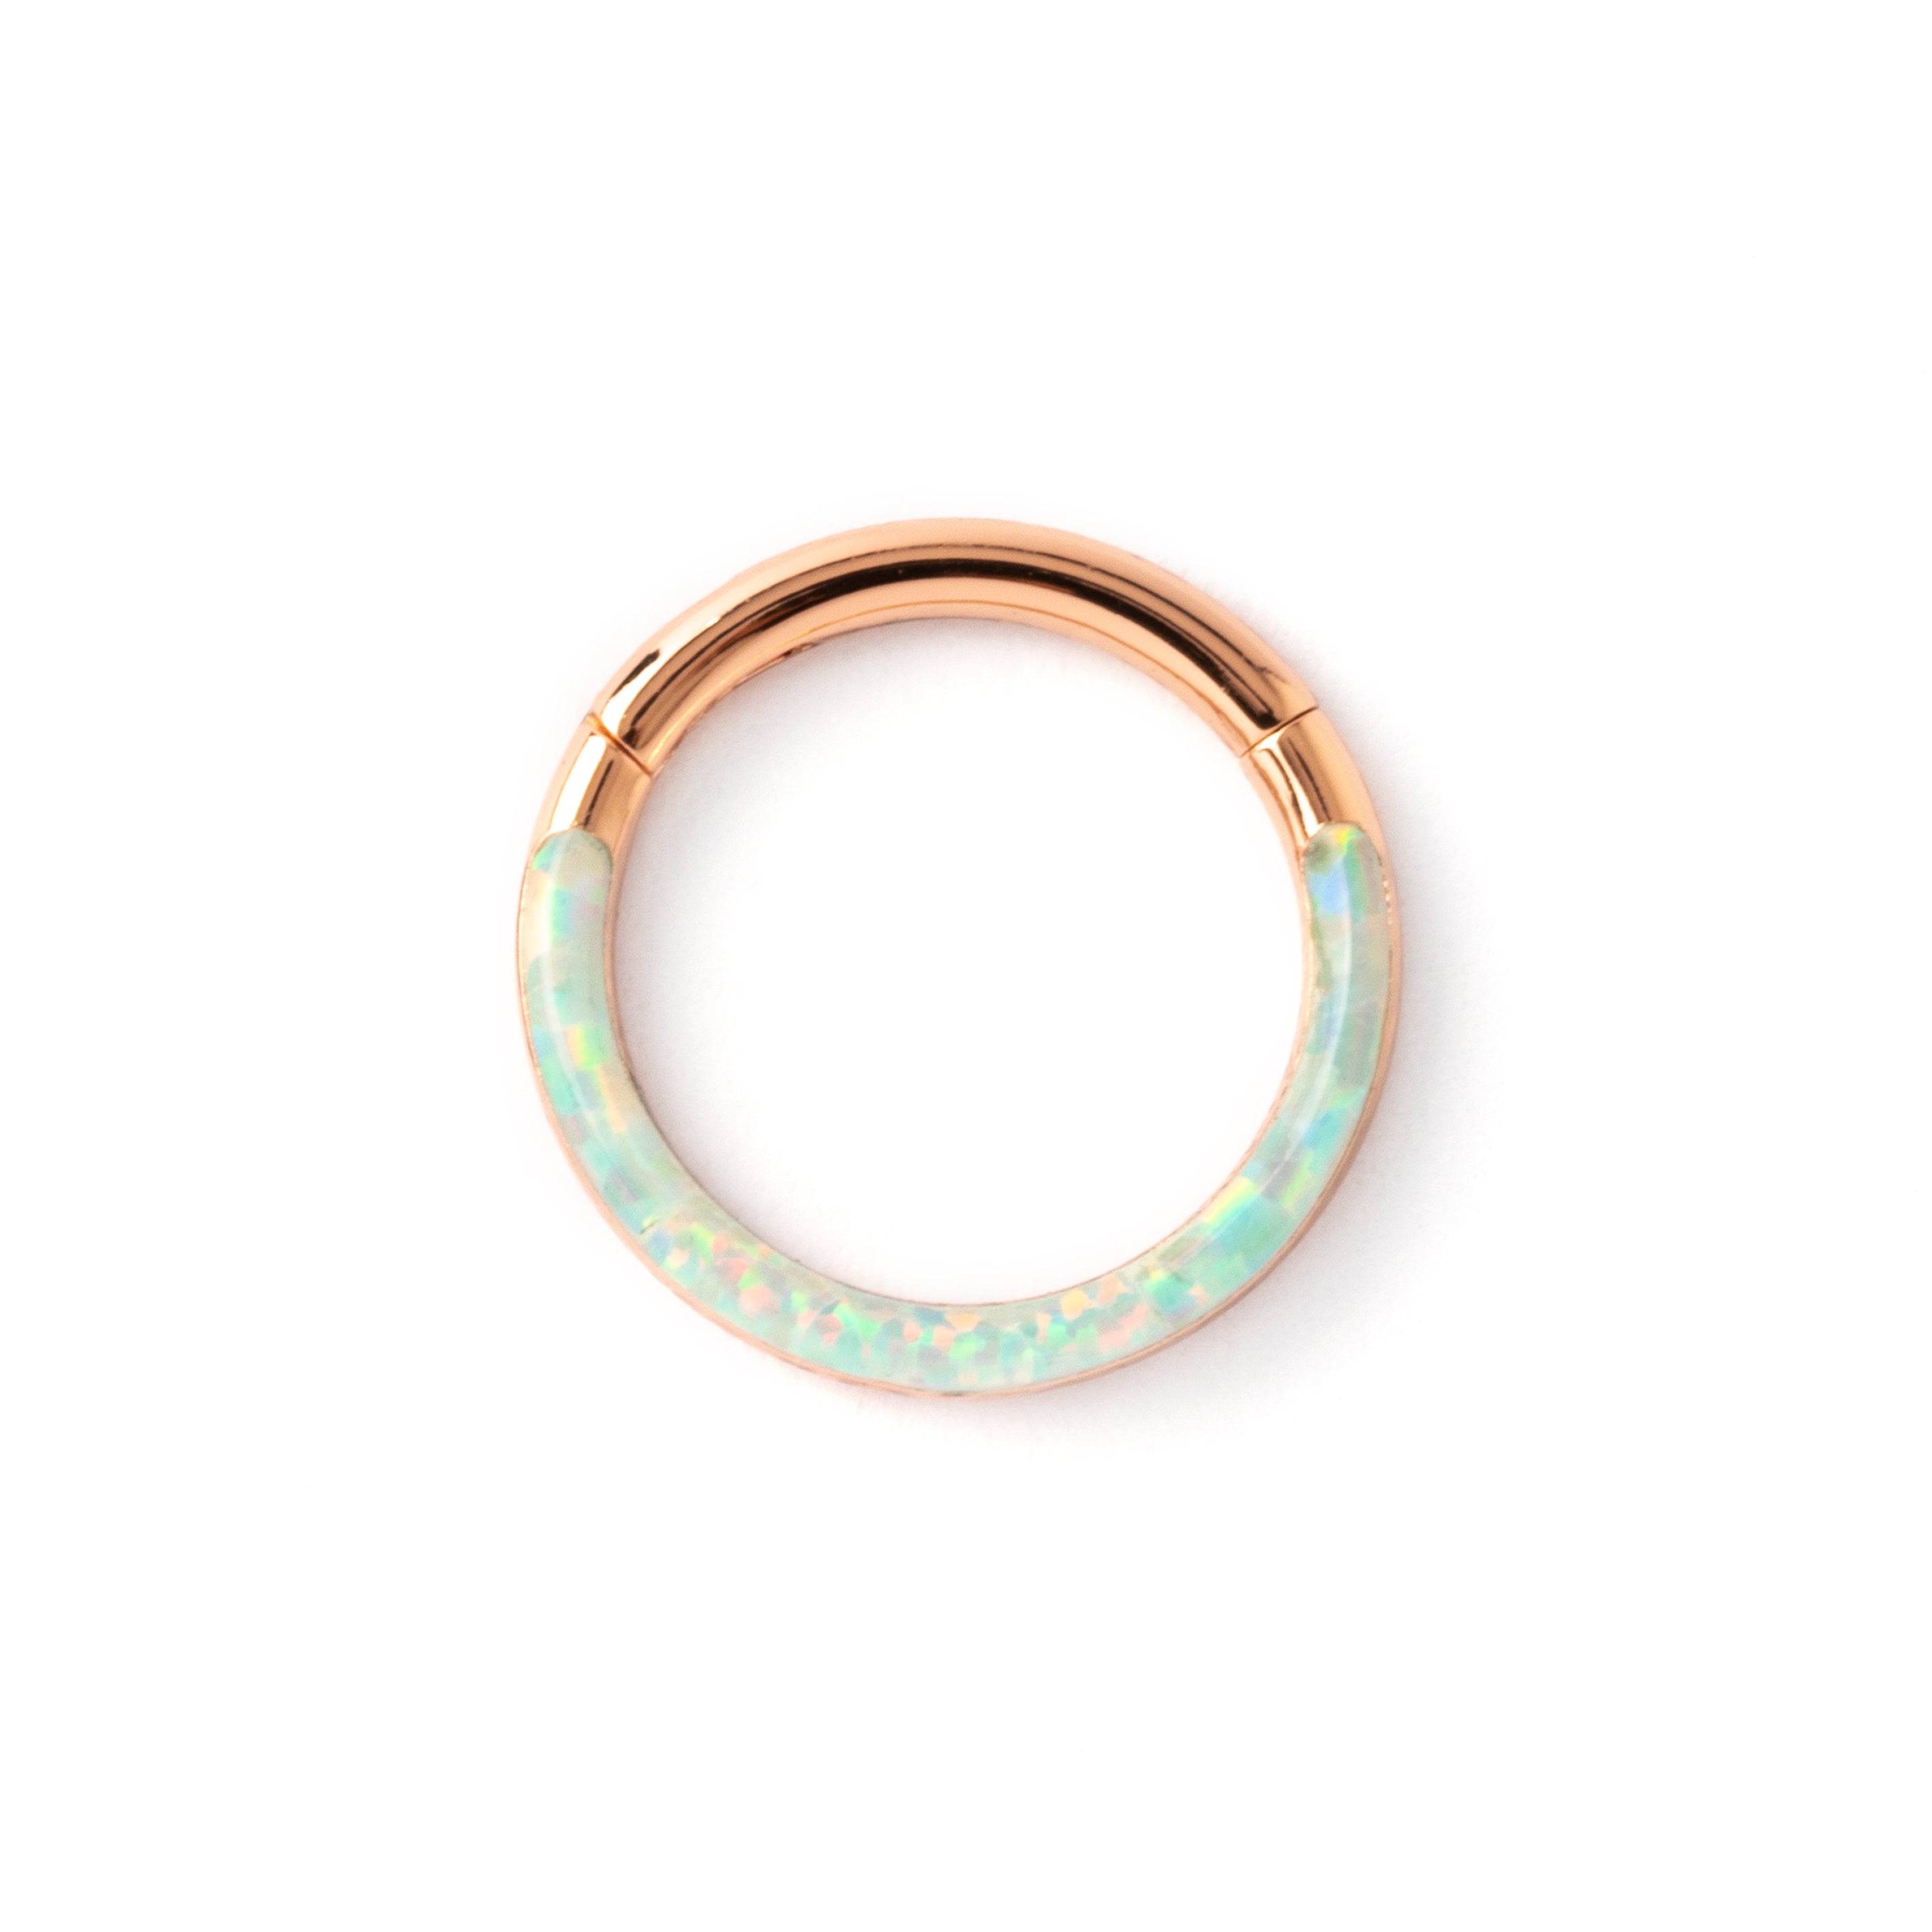 Rose Gold surgical steel septum clicker ring with white opal inlay frontal view